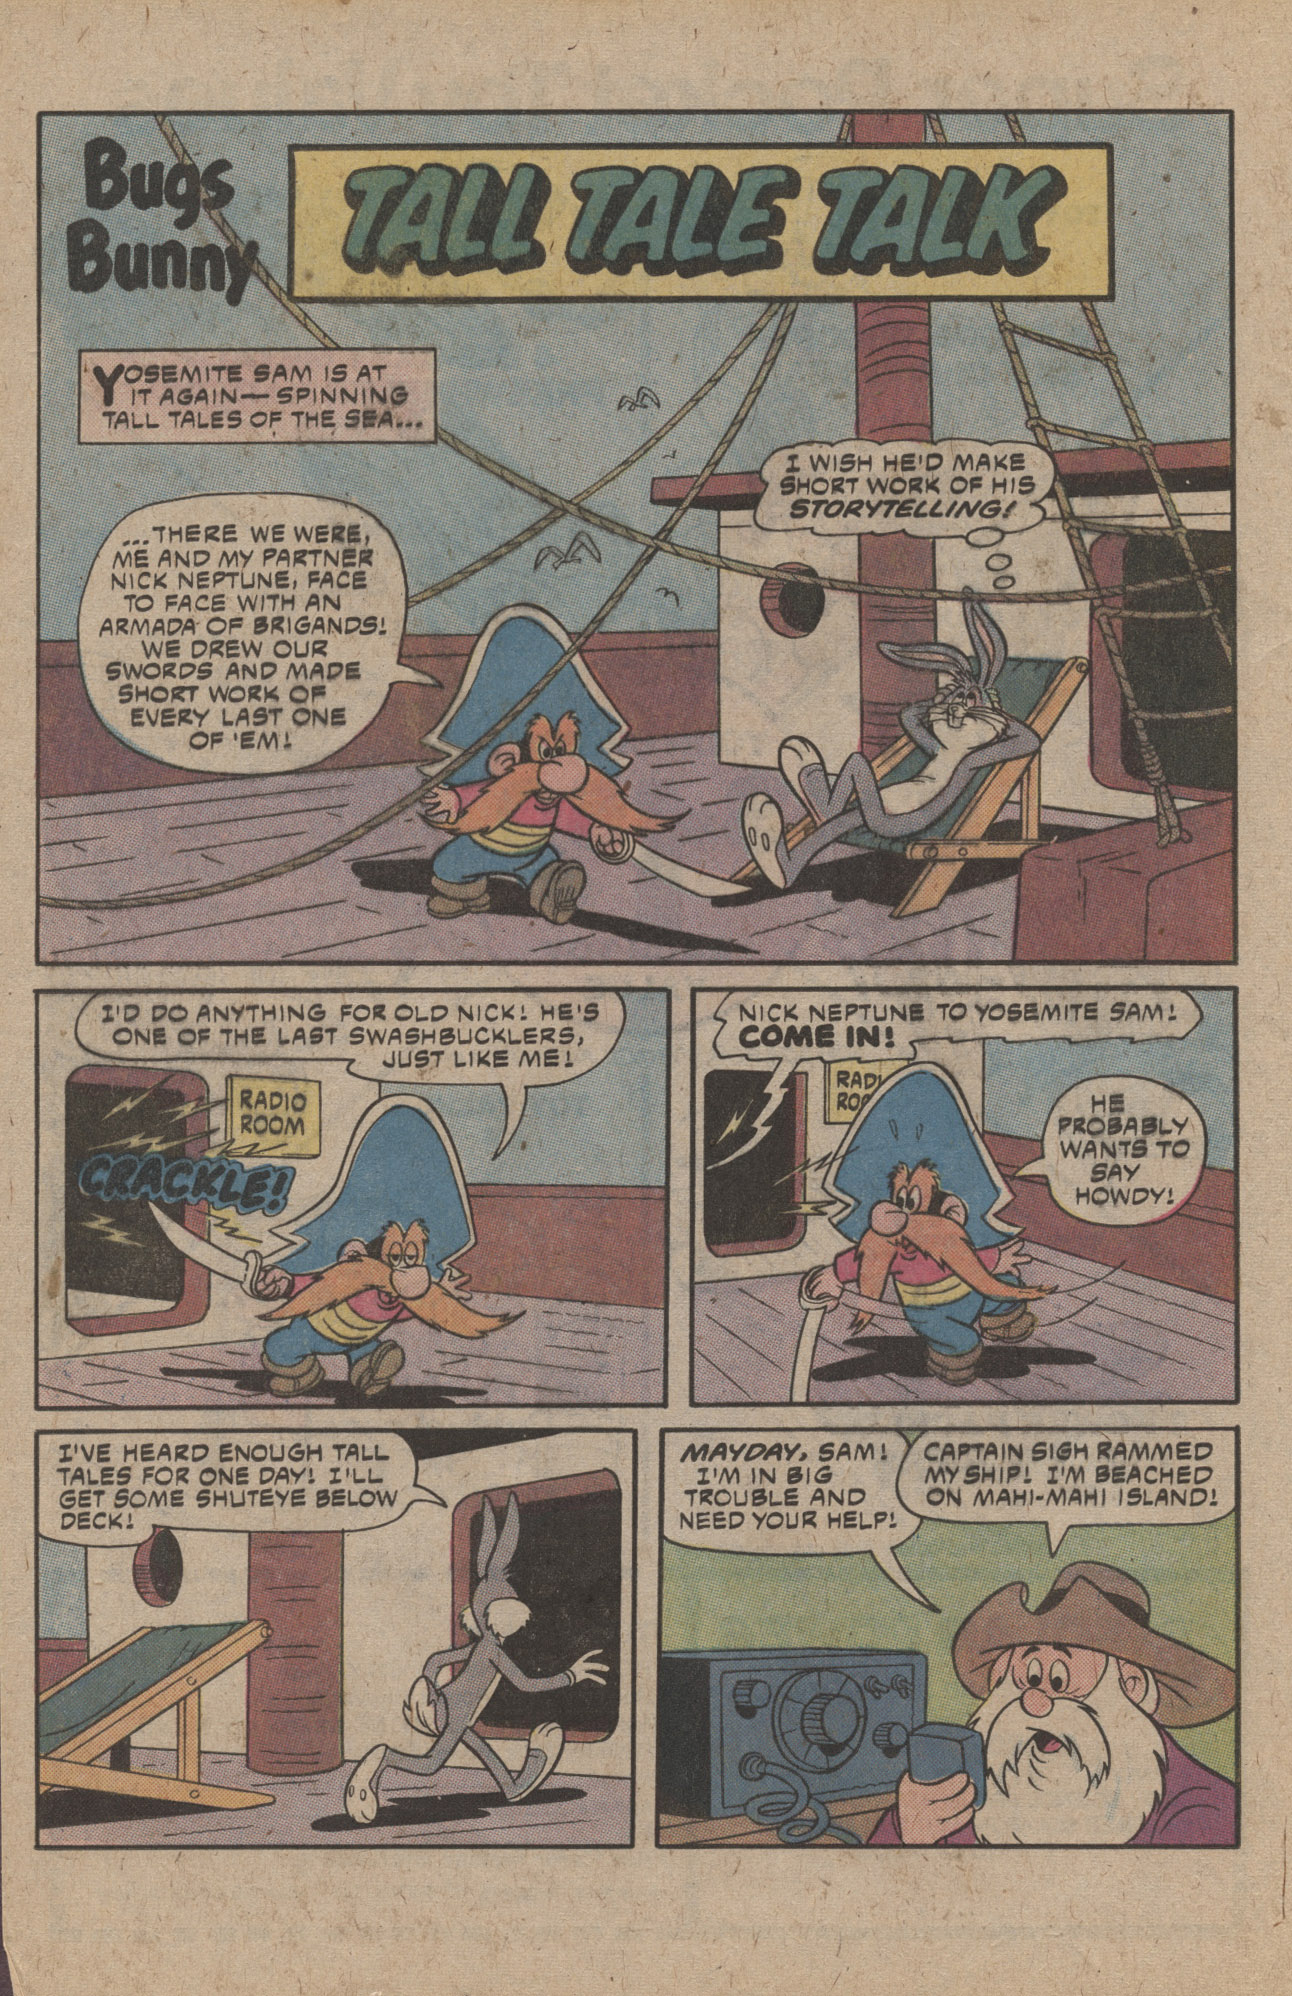 Read online Bugs Bunny comic -  Issue #210 - 16